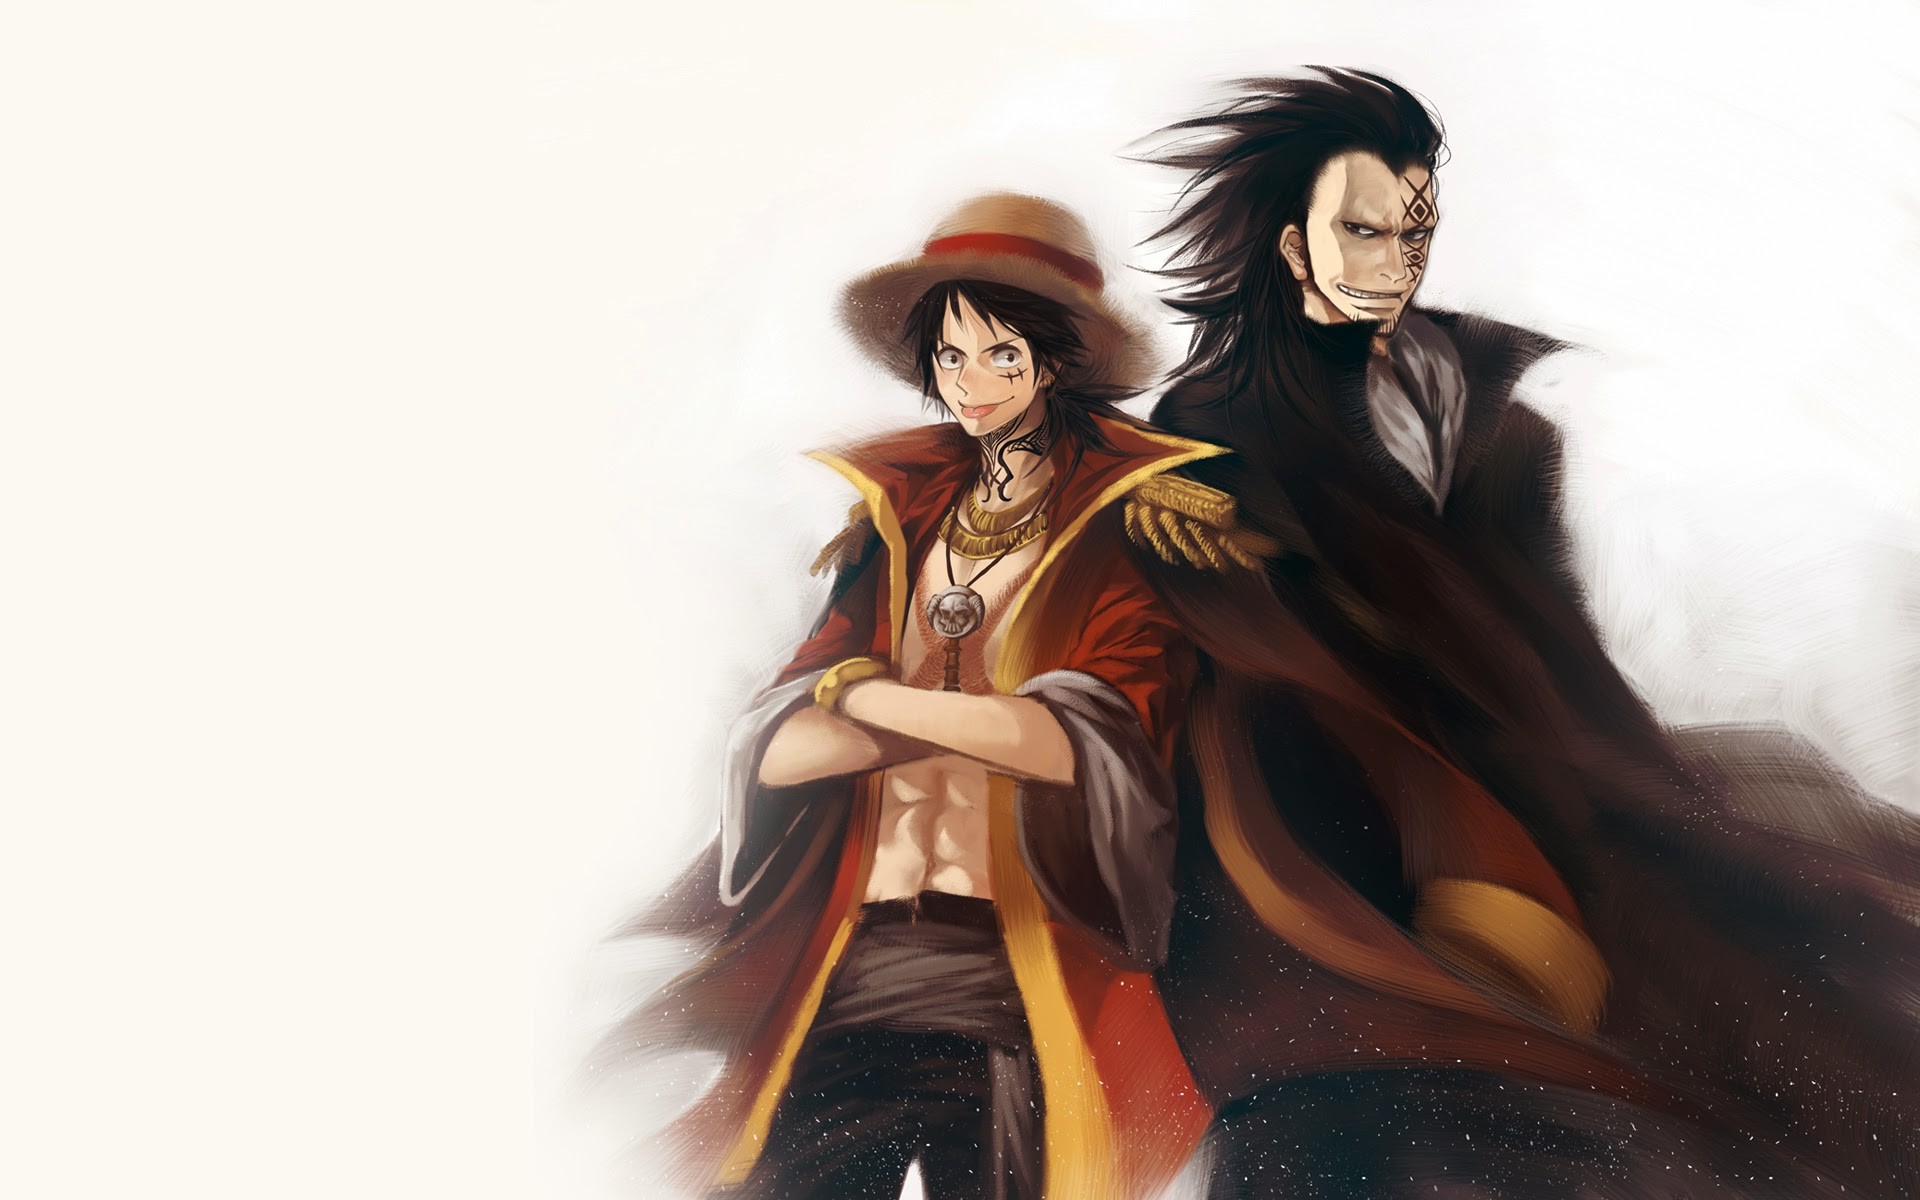 1920x1200 One Piece Luffy Pirate King Image source from this